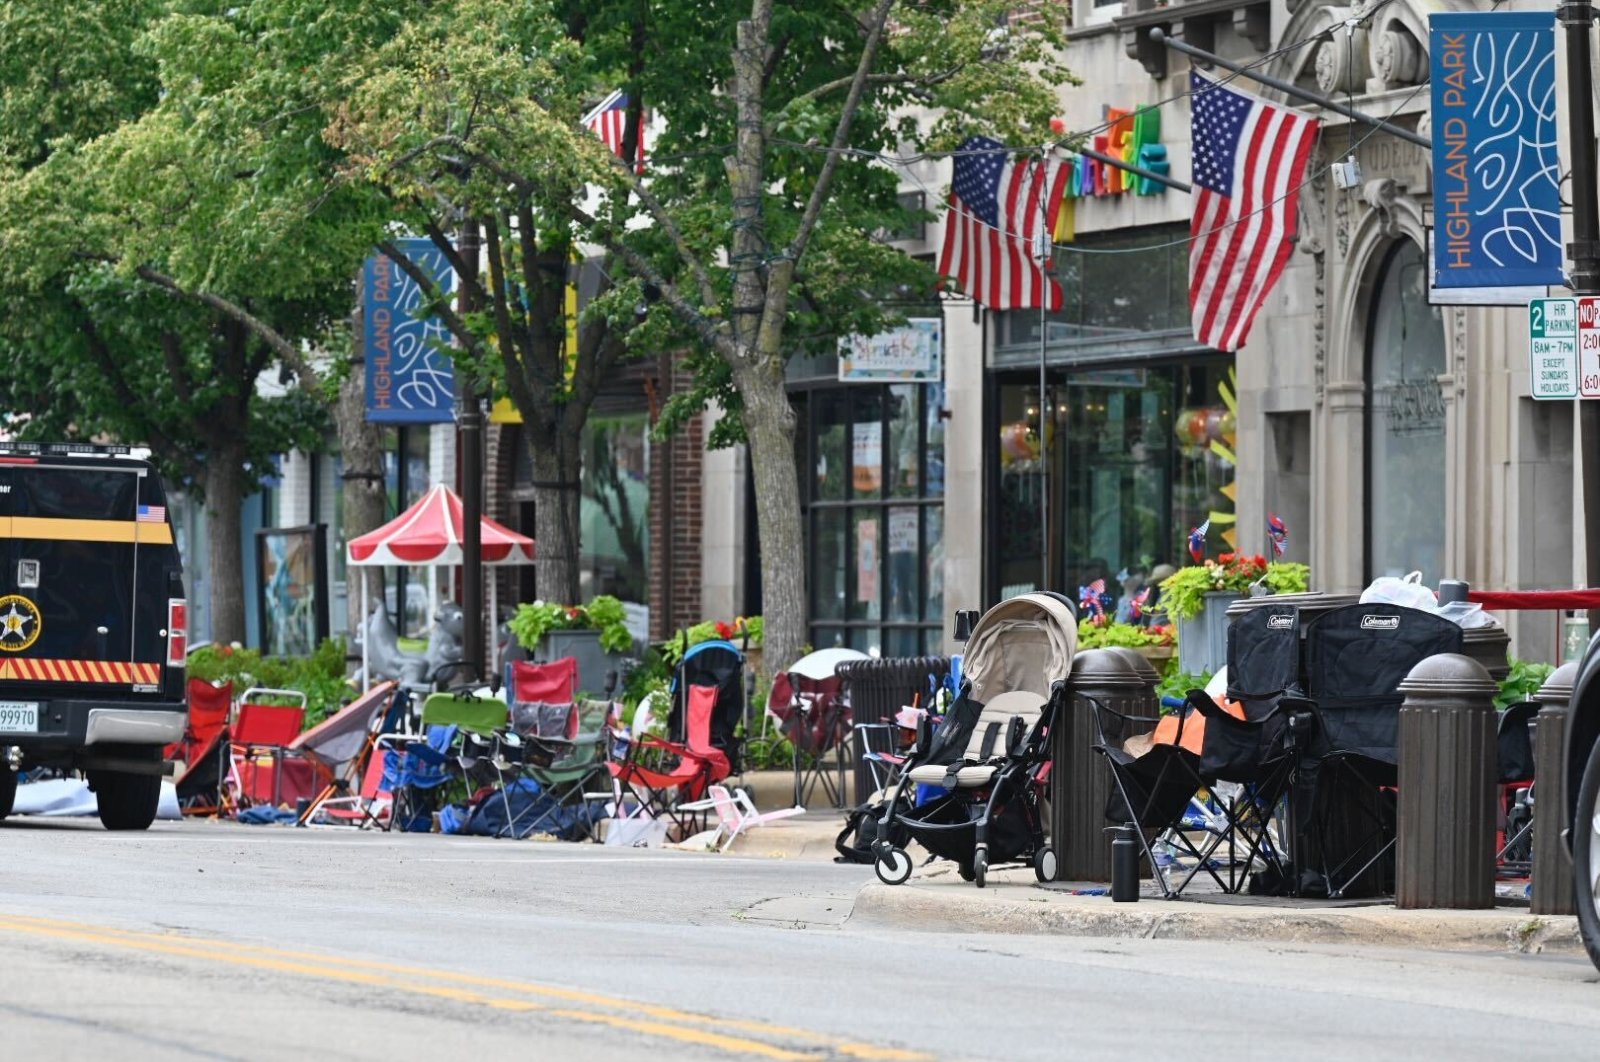 Empty chairs sit along the sidewalk after parade-goers fled Highland Park&#039;s Fourth of July parade after shots were fired, Chicago, Illinois, U.S., July 4, 2022. (Tyler Pasciak LaRiviere/Chicago Sun-Times via AP)